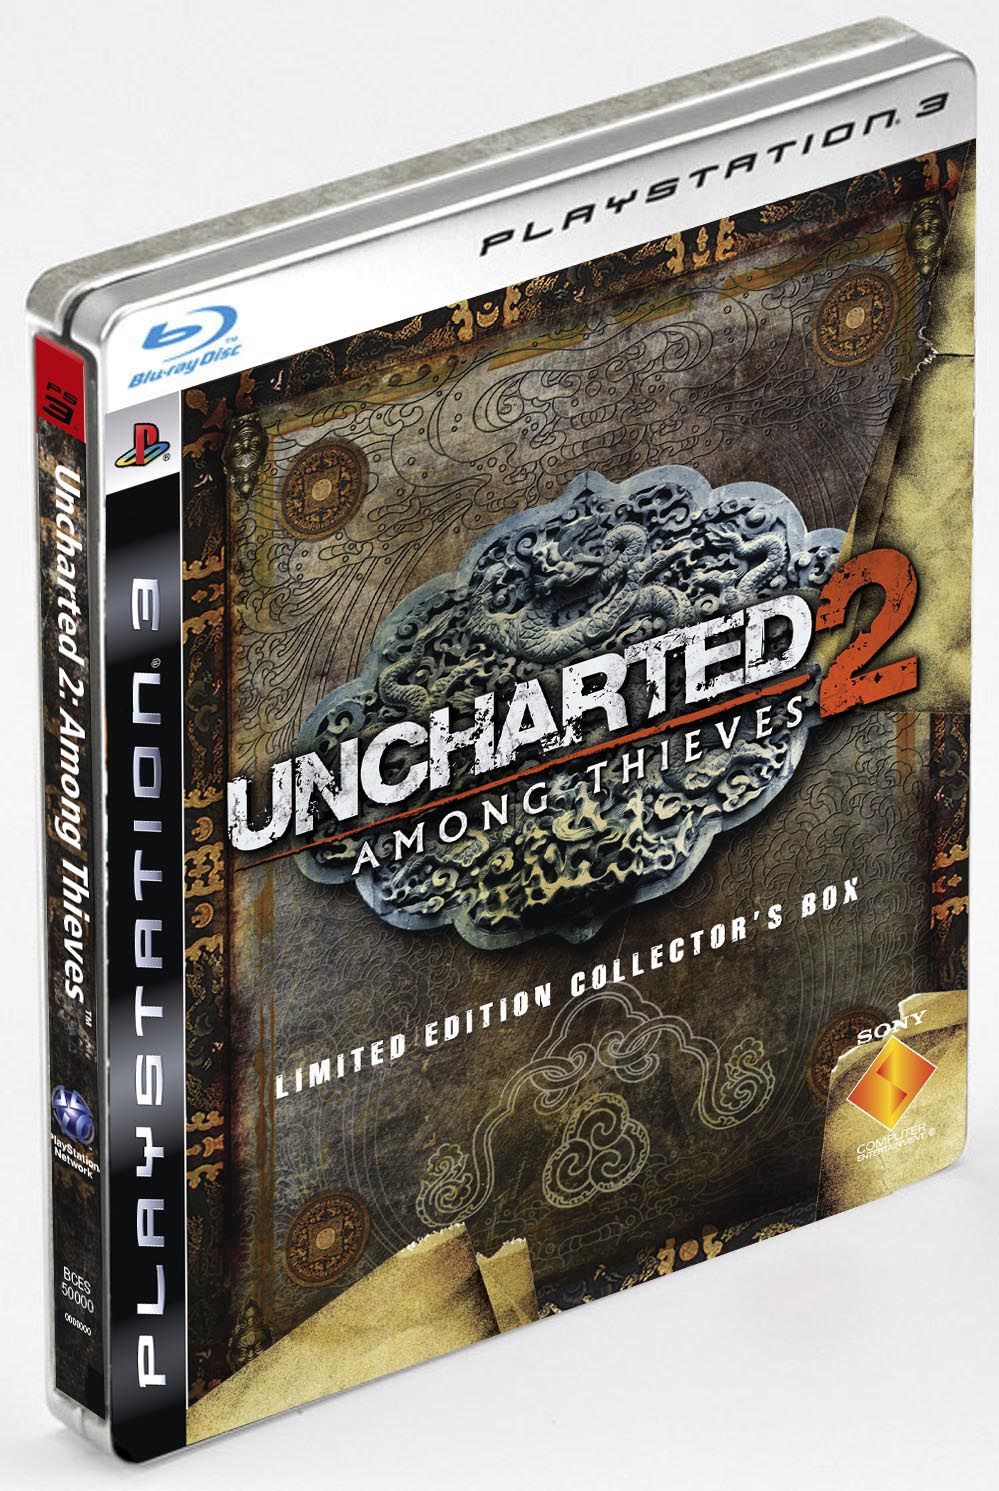 Uncharted 2 : Among thieves collectors edition